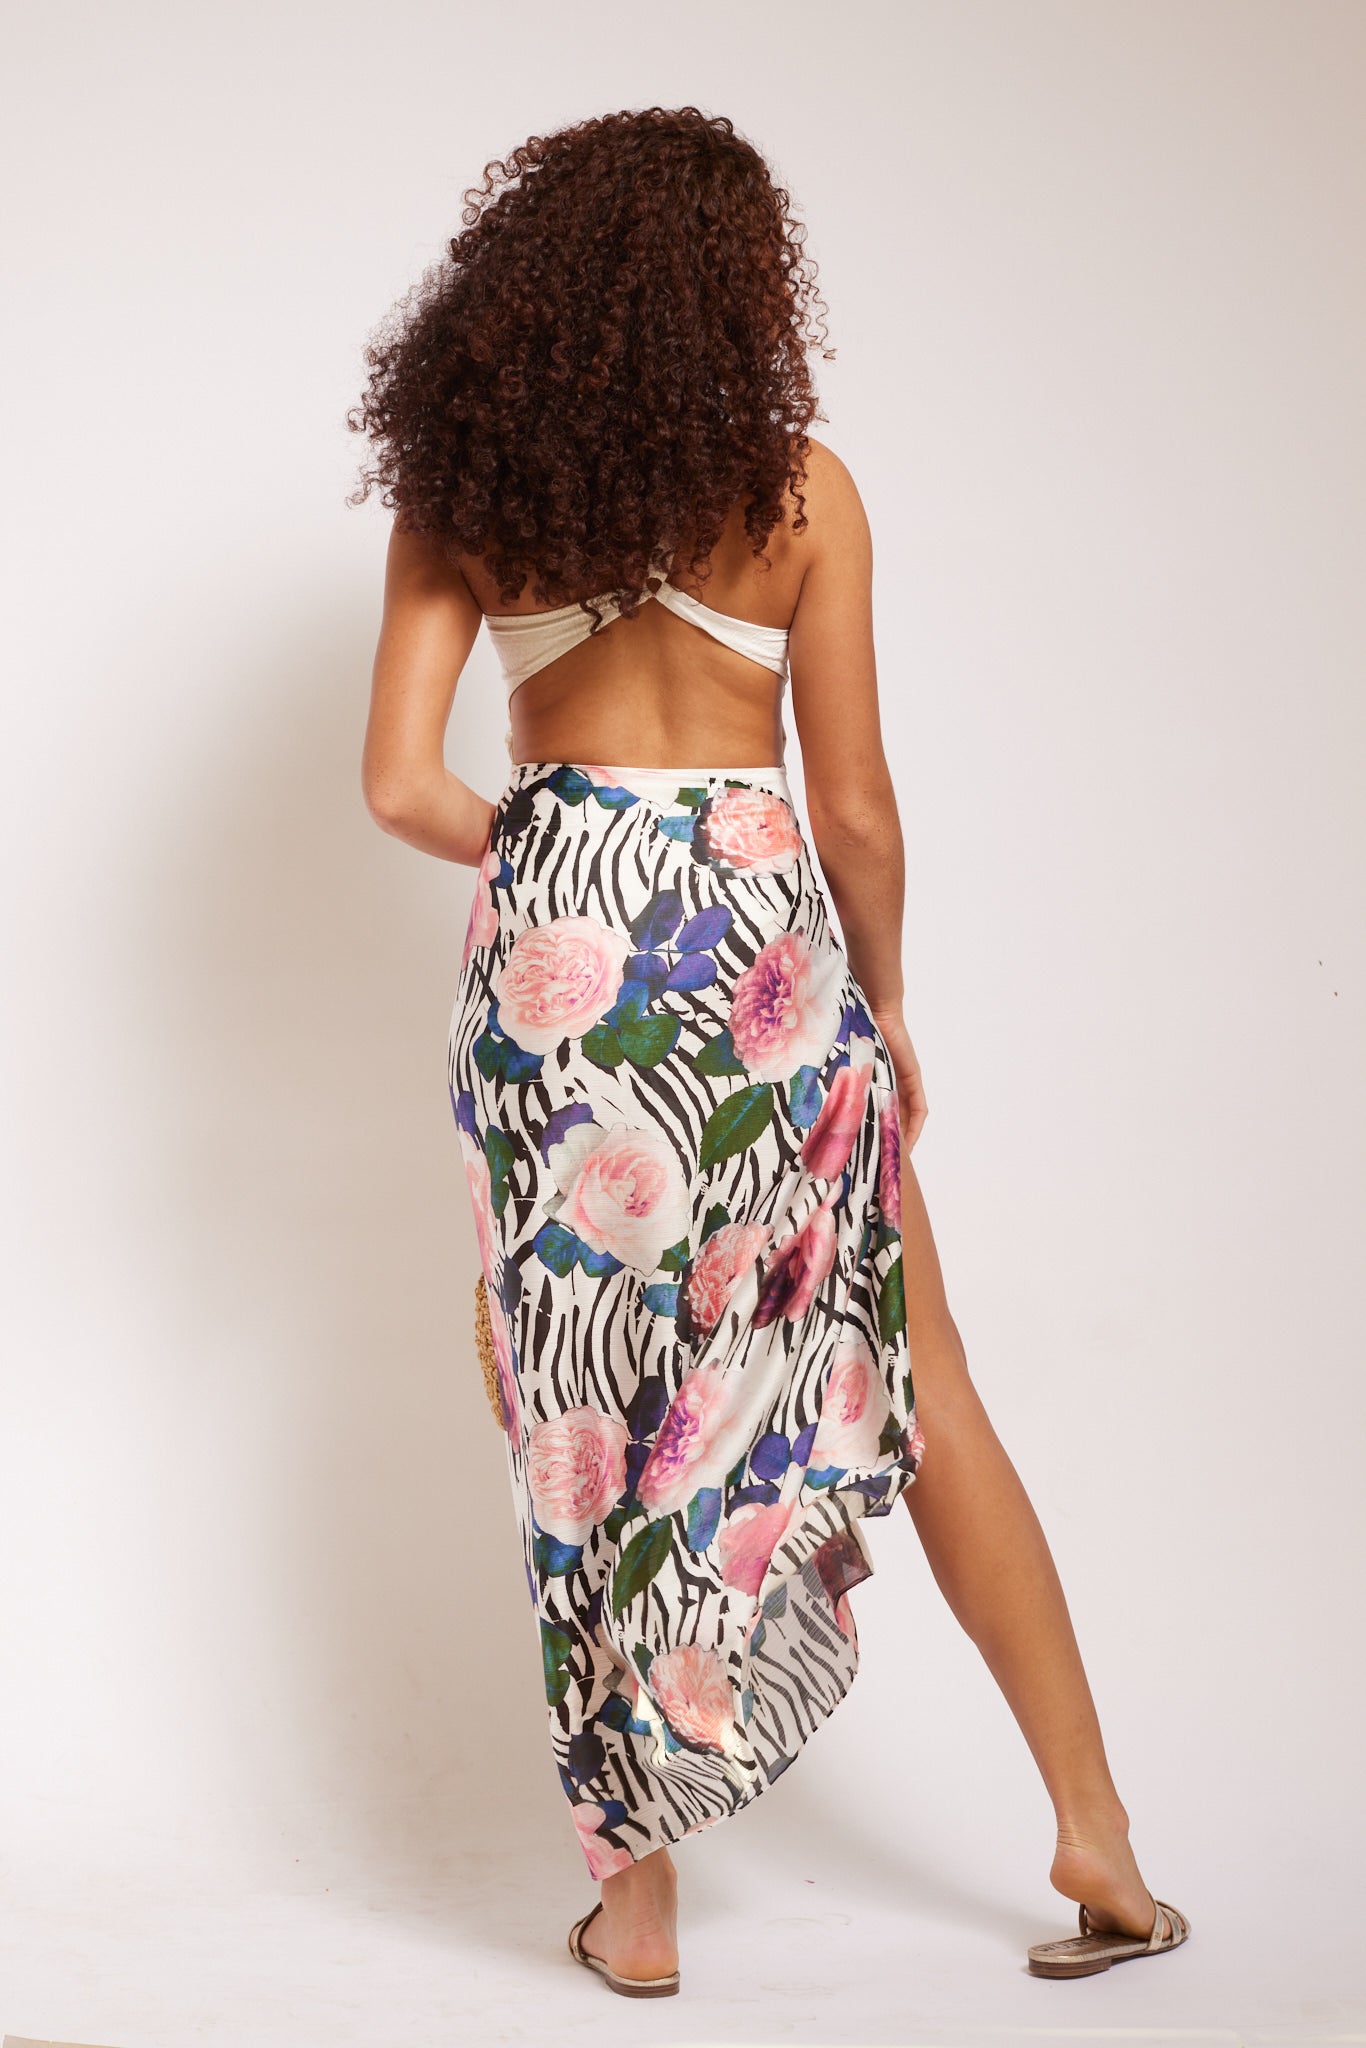 back view of woman modelling all over peach poppy print sarong beachwear with crinkled chiffon and tassel ends